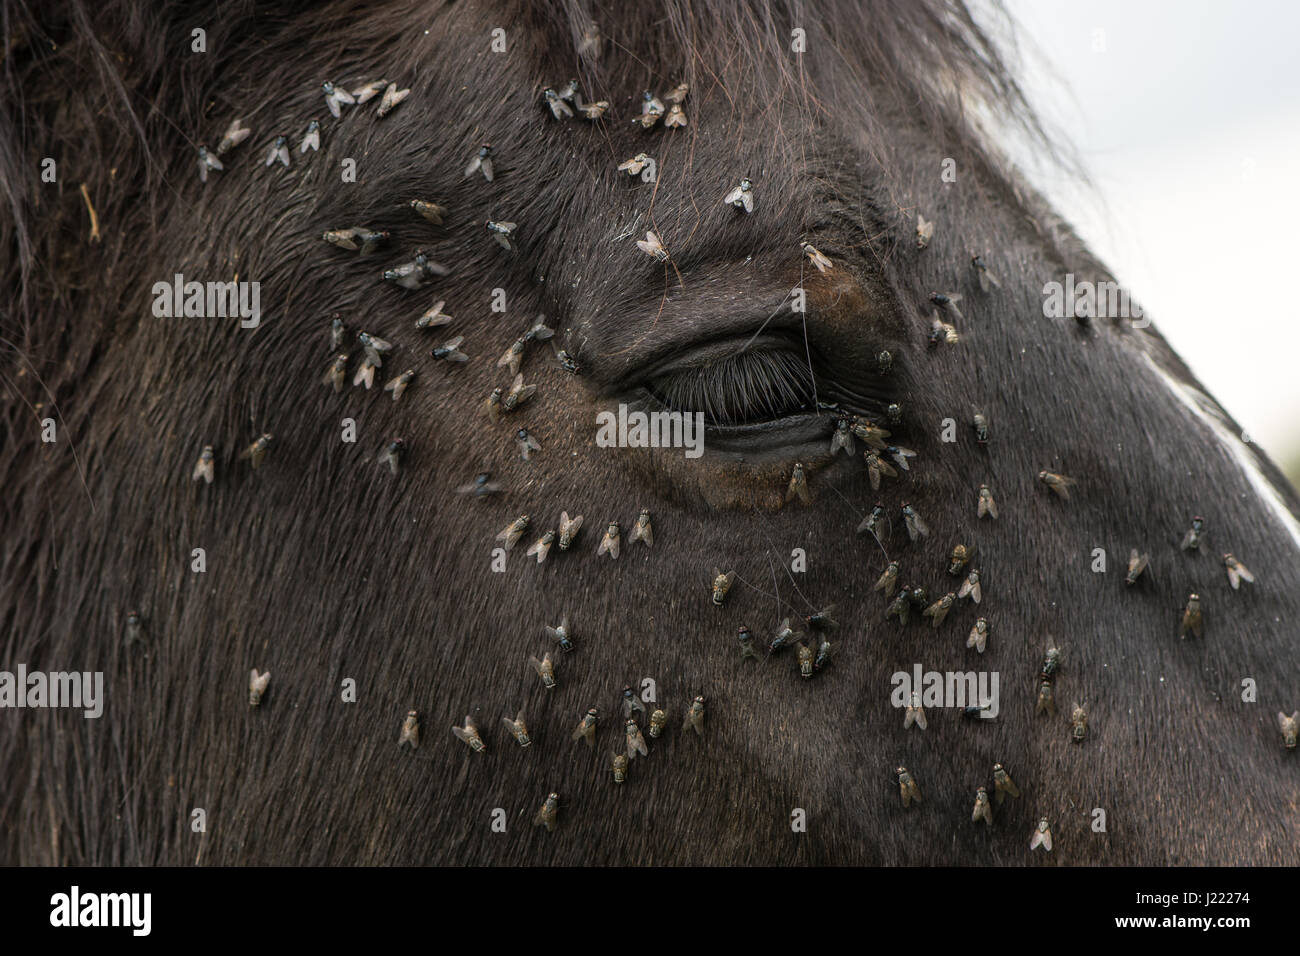 Horse with lots of flies on face and eye. Brown horse suffering swarm of insects about face and drinking from tear ducts Stock Photo